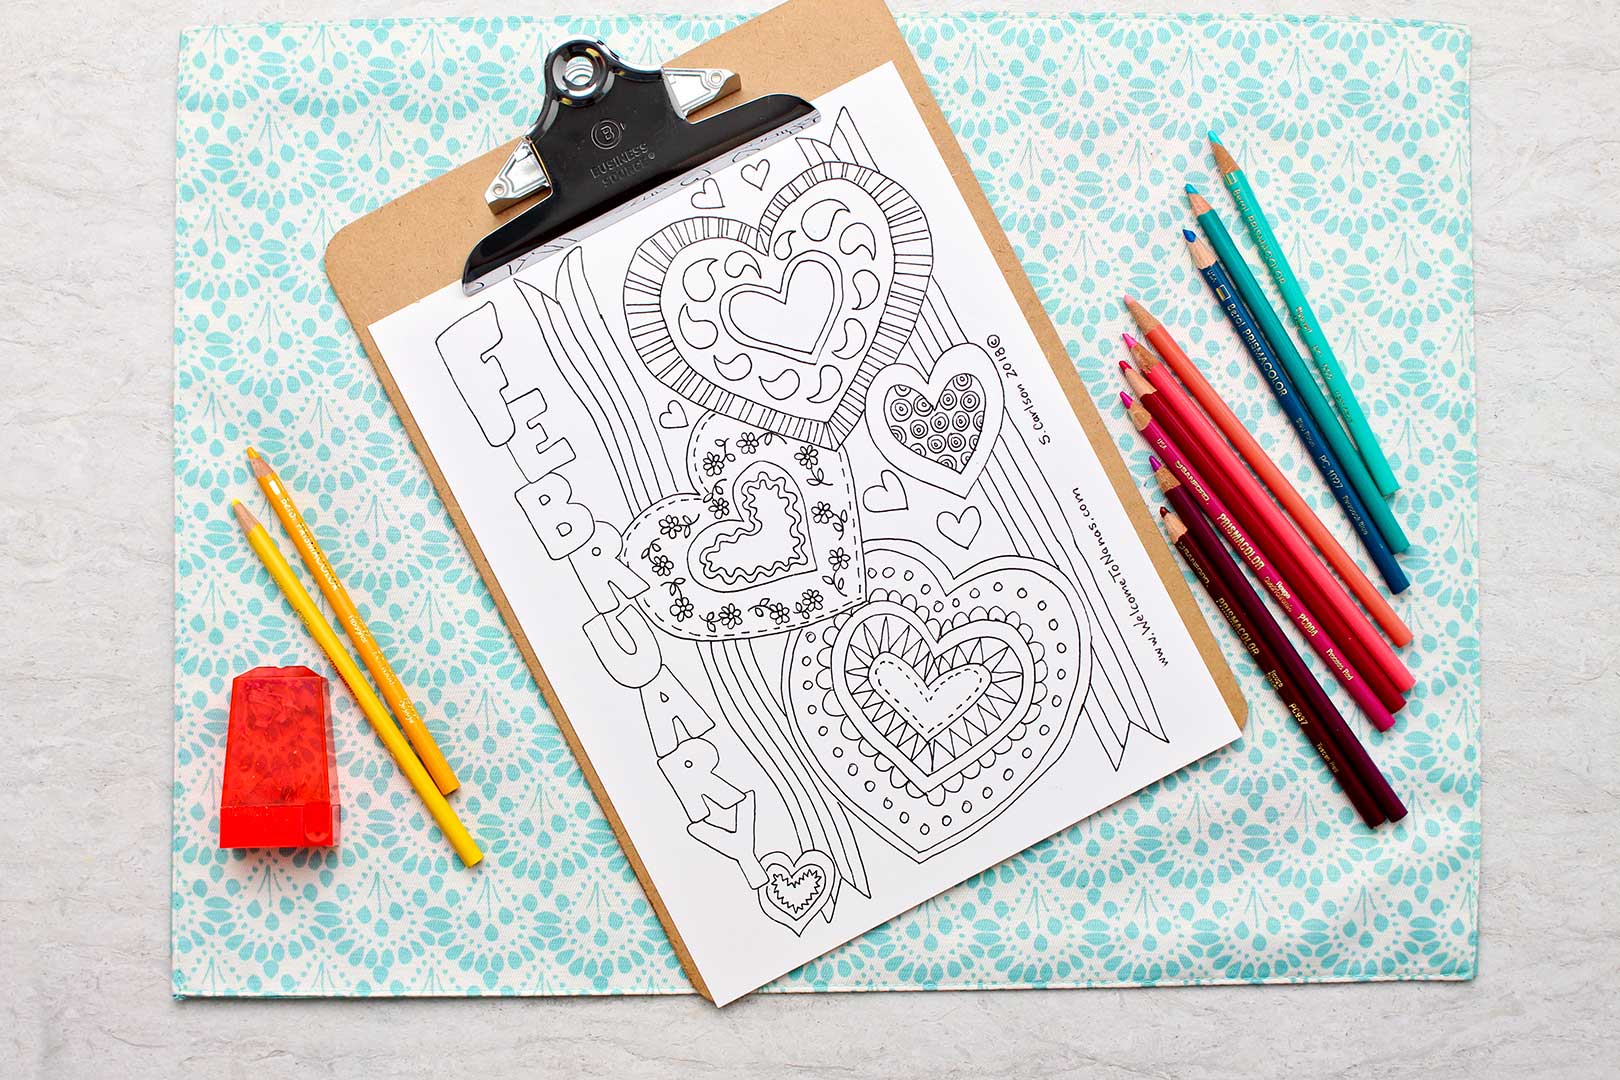 Uncolored February Coloring Page on clipboard with colored pencils near by.